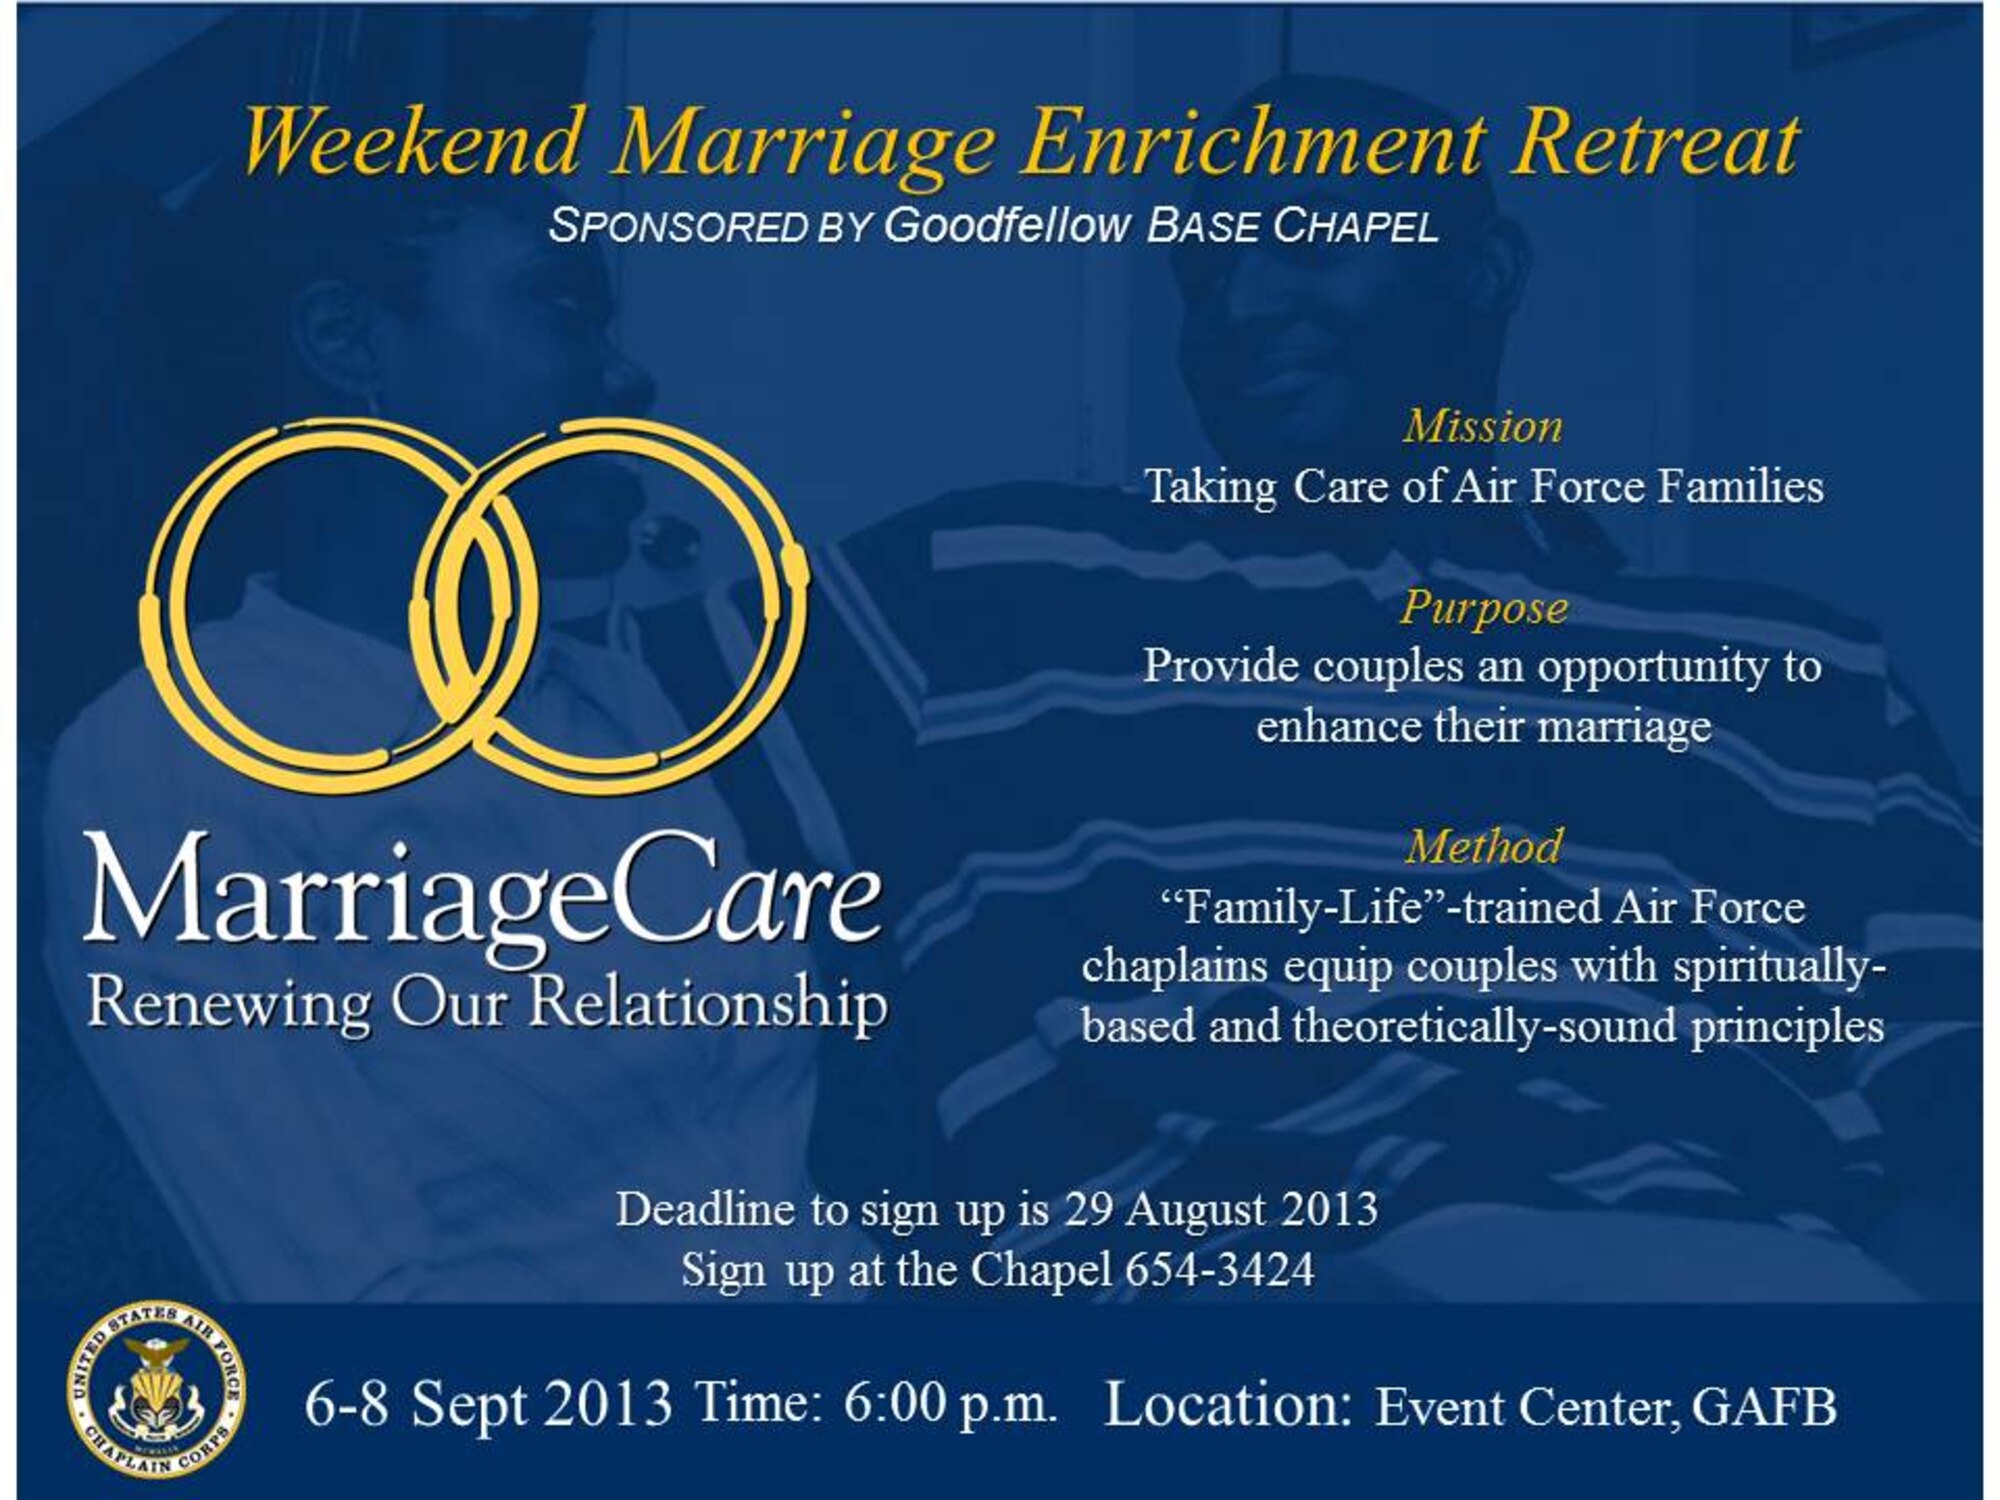 The Taylor Chapel is hosting a free weekend marriage enrichment retreat for permanent party only Sept. 6-8 at the Event Center. (Courtesy graphic)